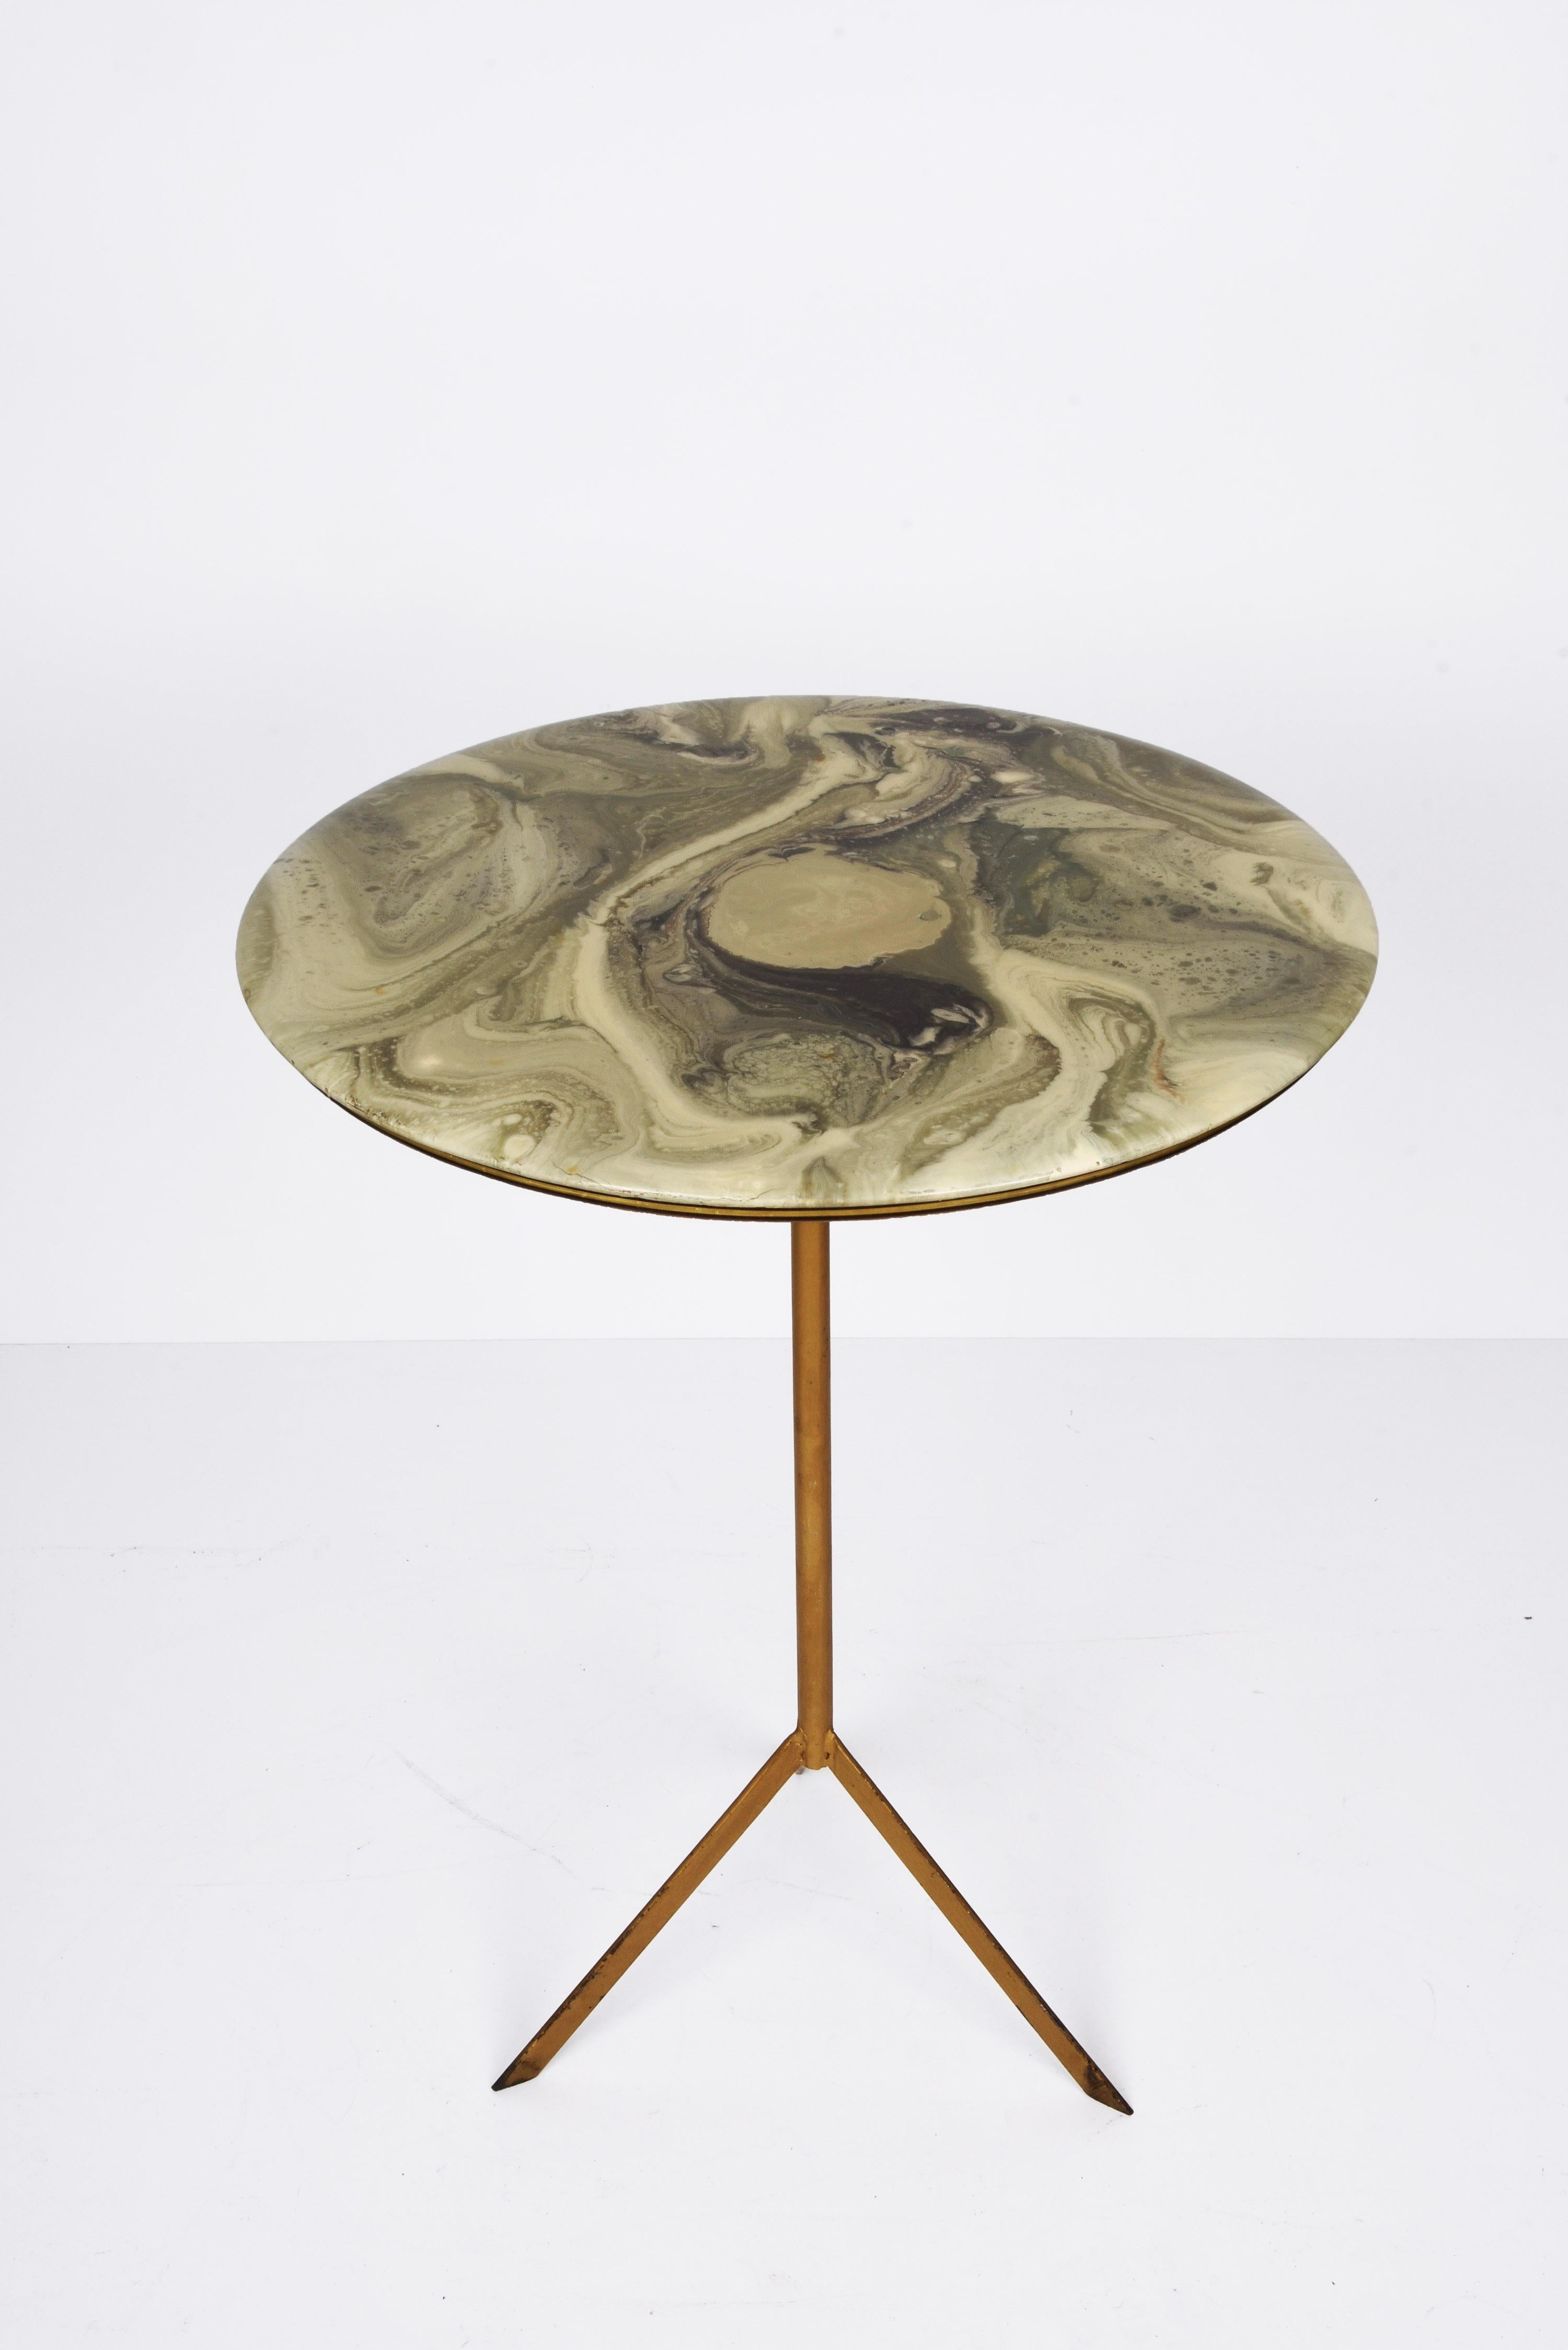 Midcentury Round Italian Gueridon Table with Marble Resin Top and Metal, 1950s For Sale 2